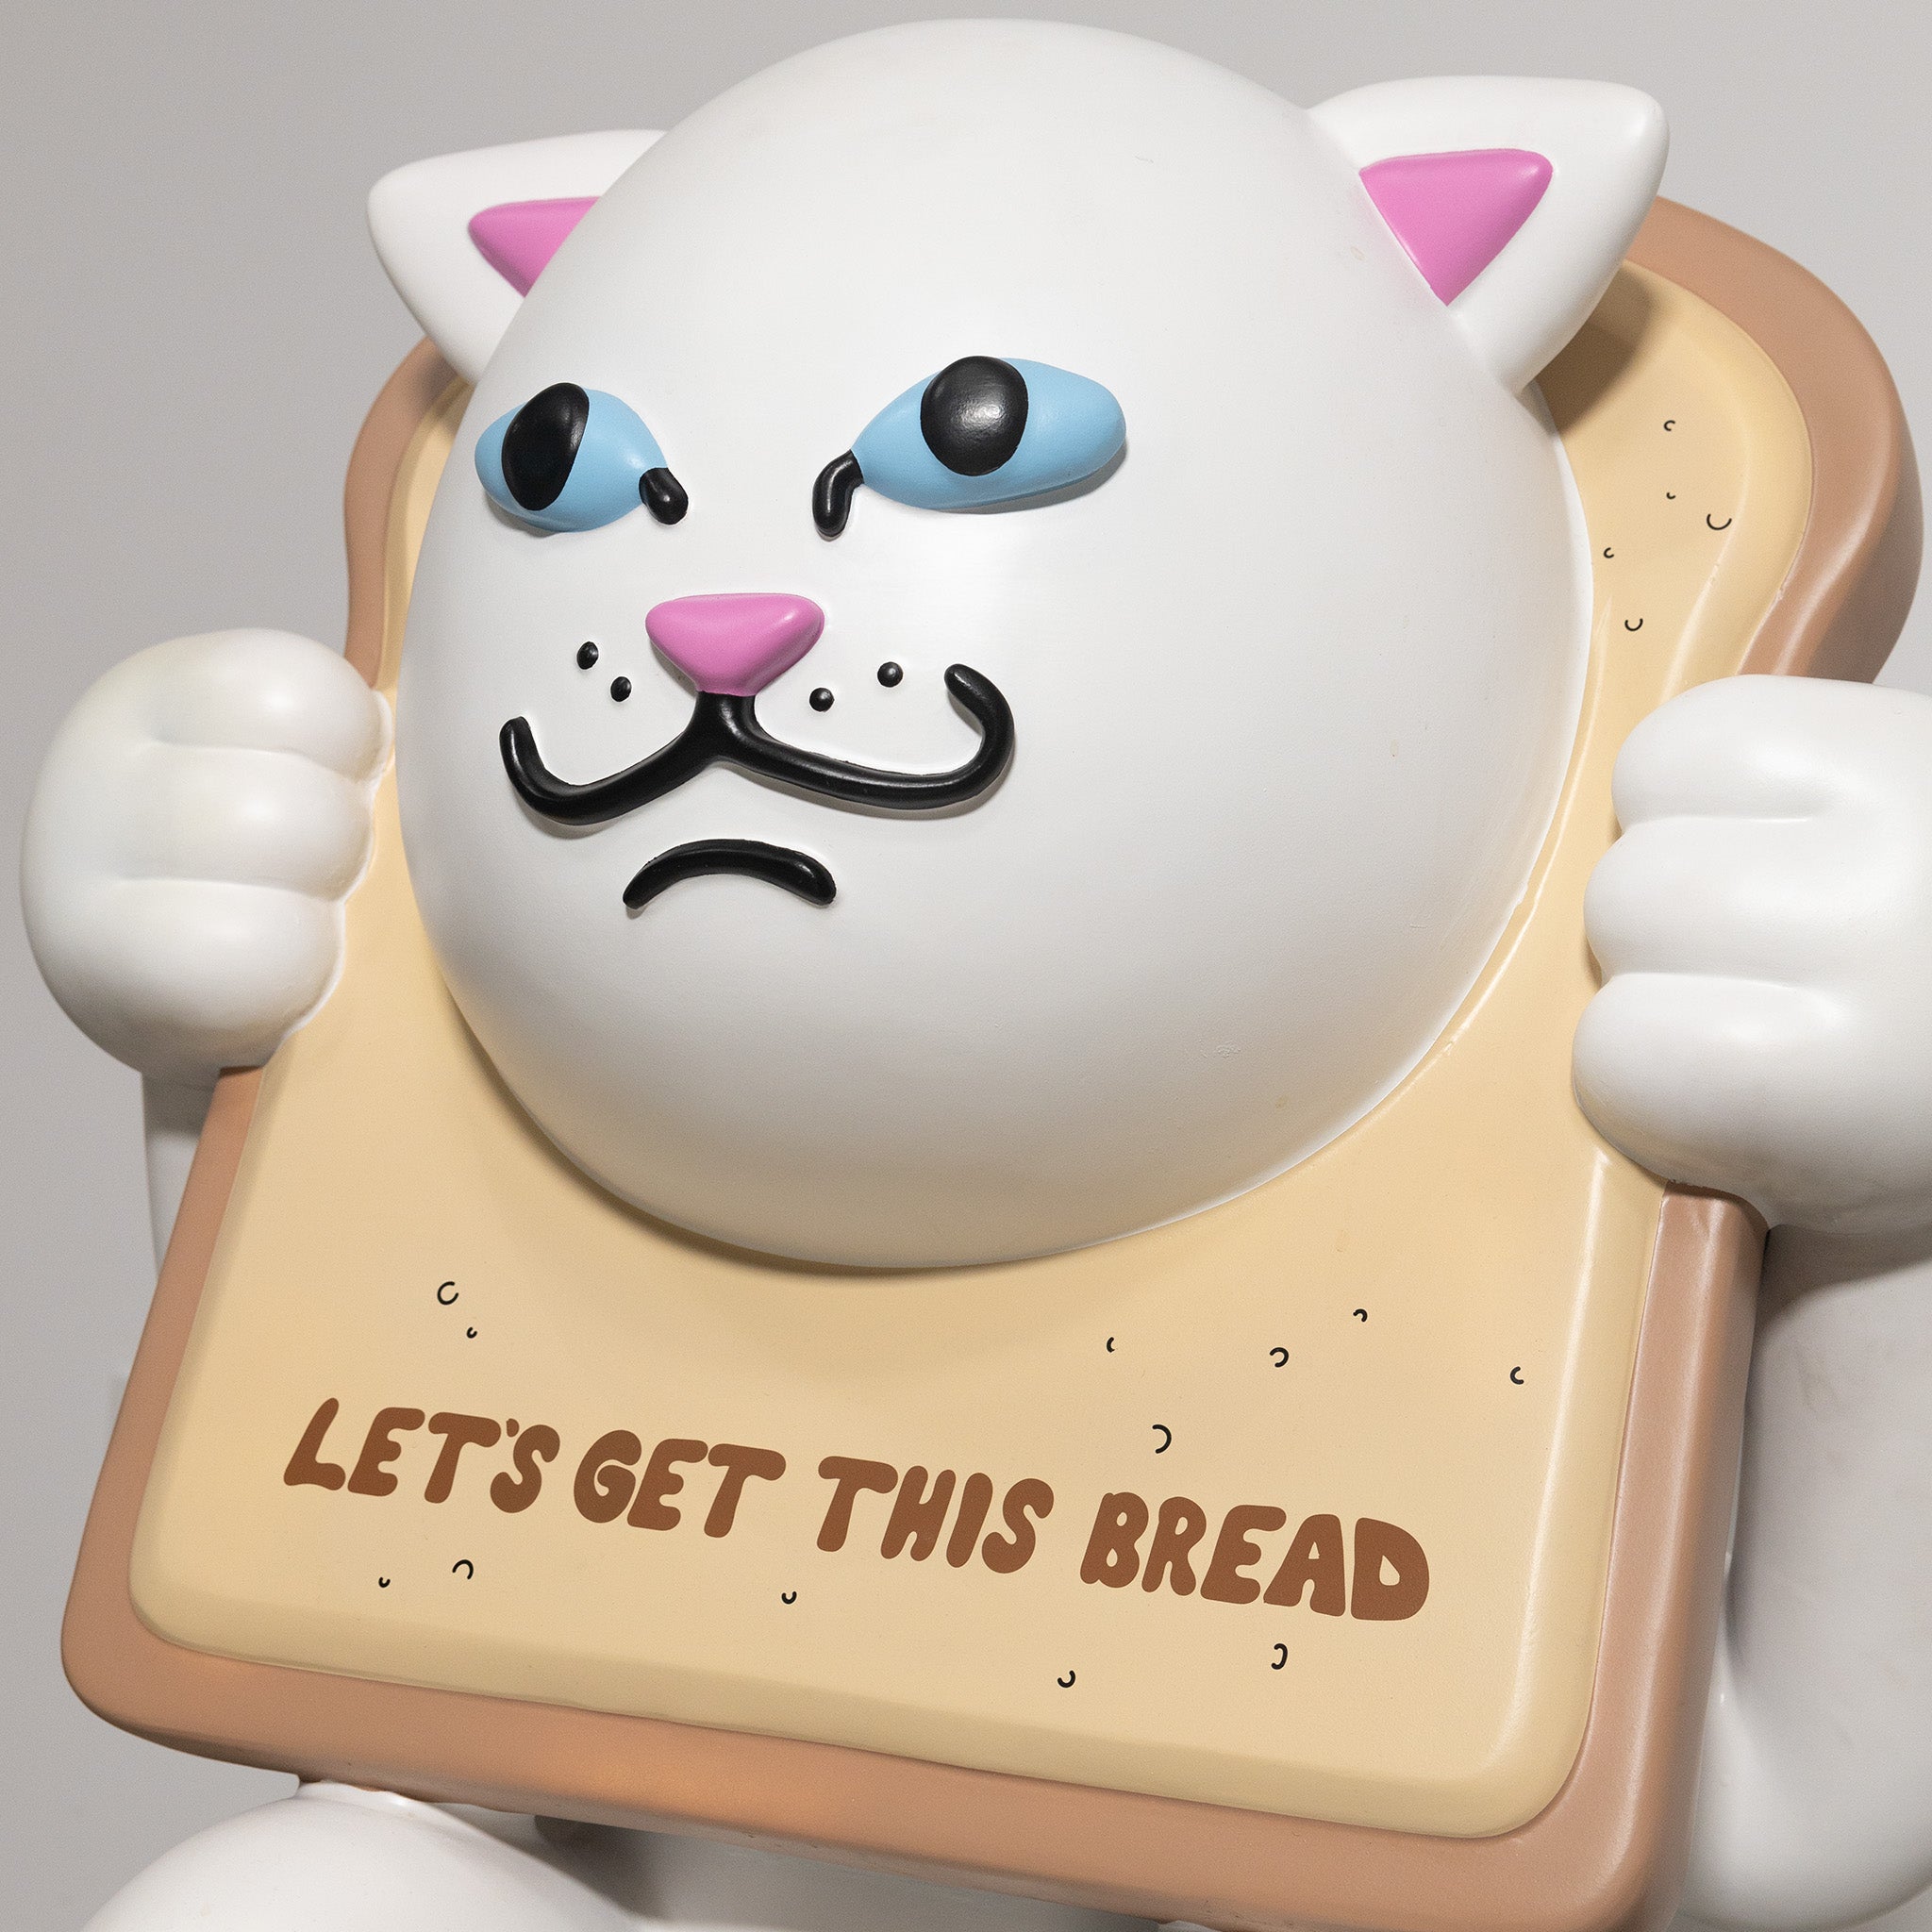 RipNDip Lets Get This Bread 4 Foot Figure